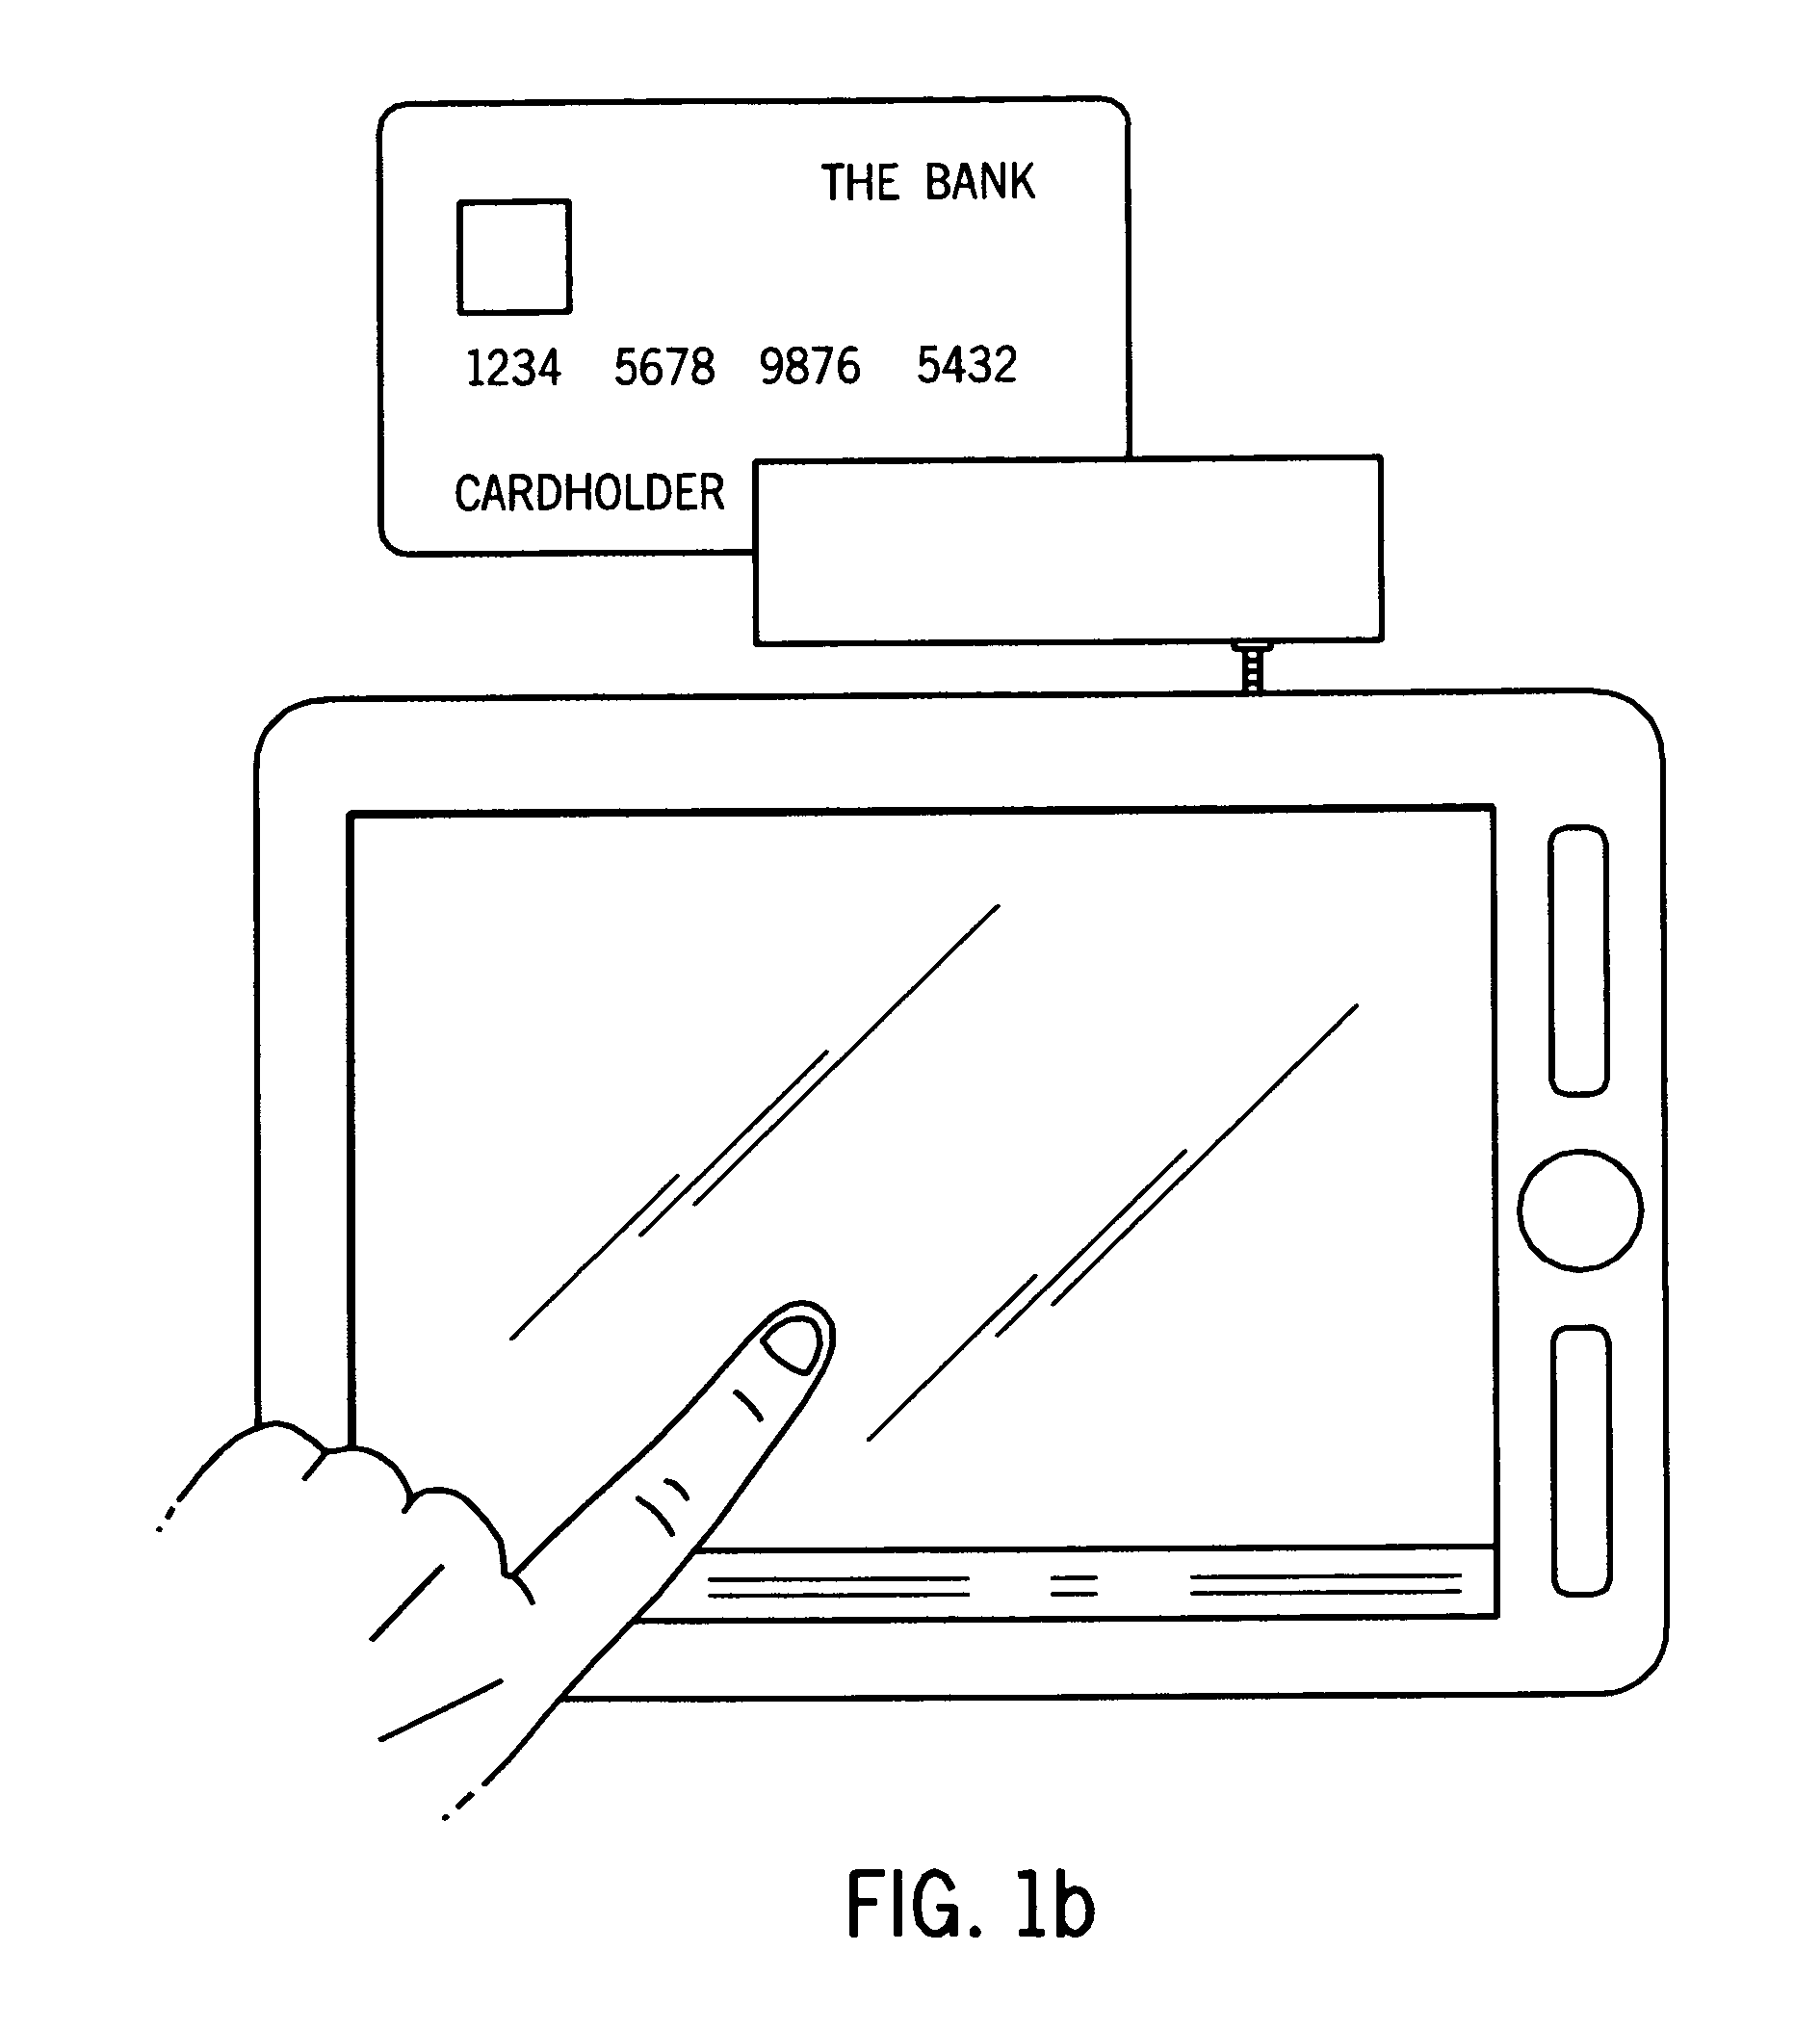 Remote invoice and negotiable instrument processing